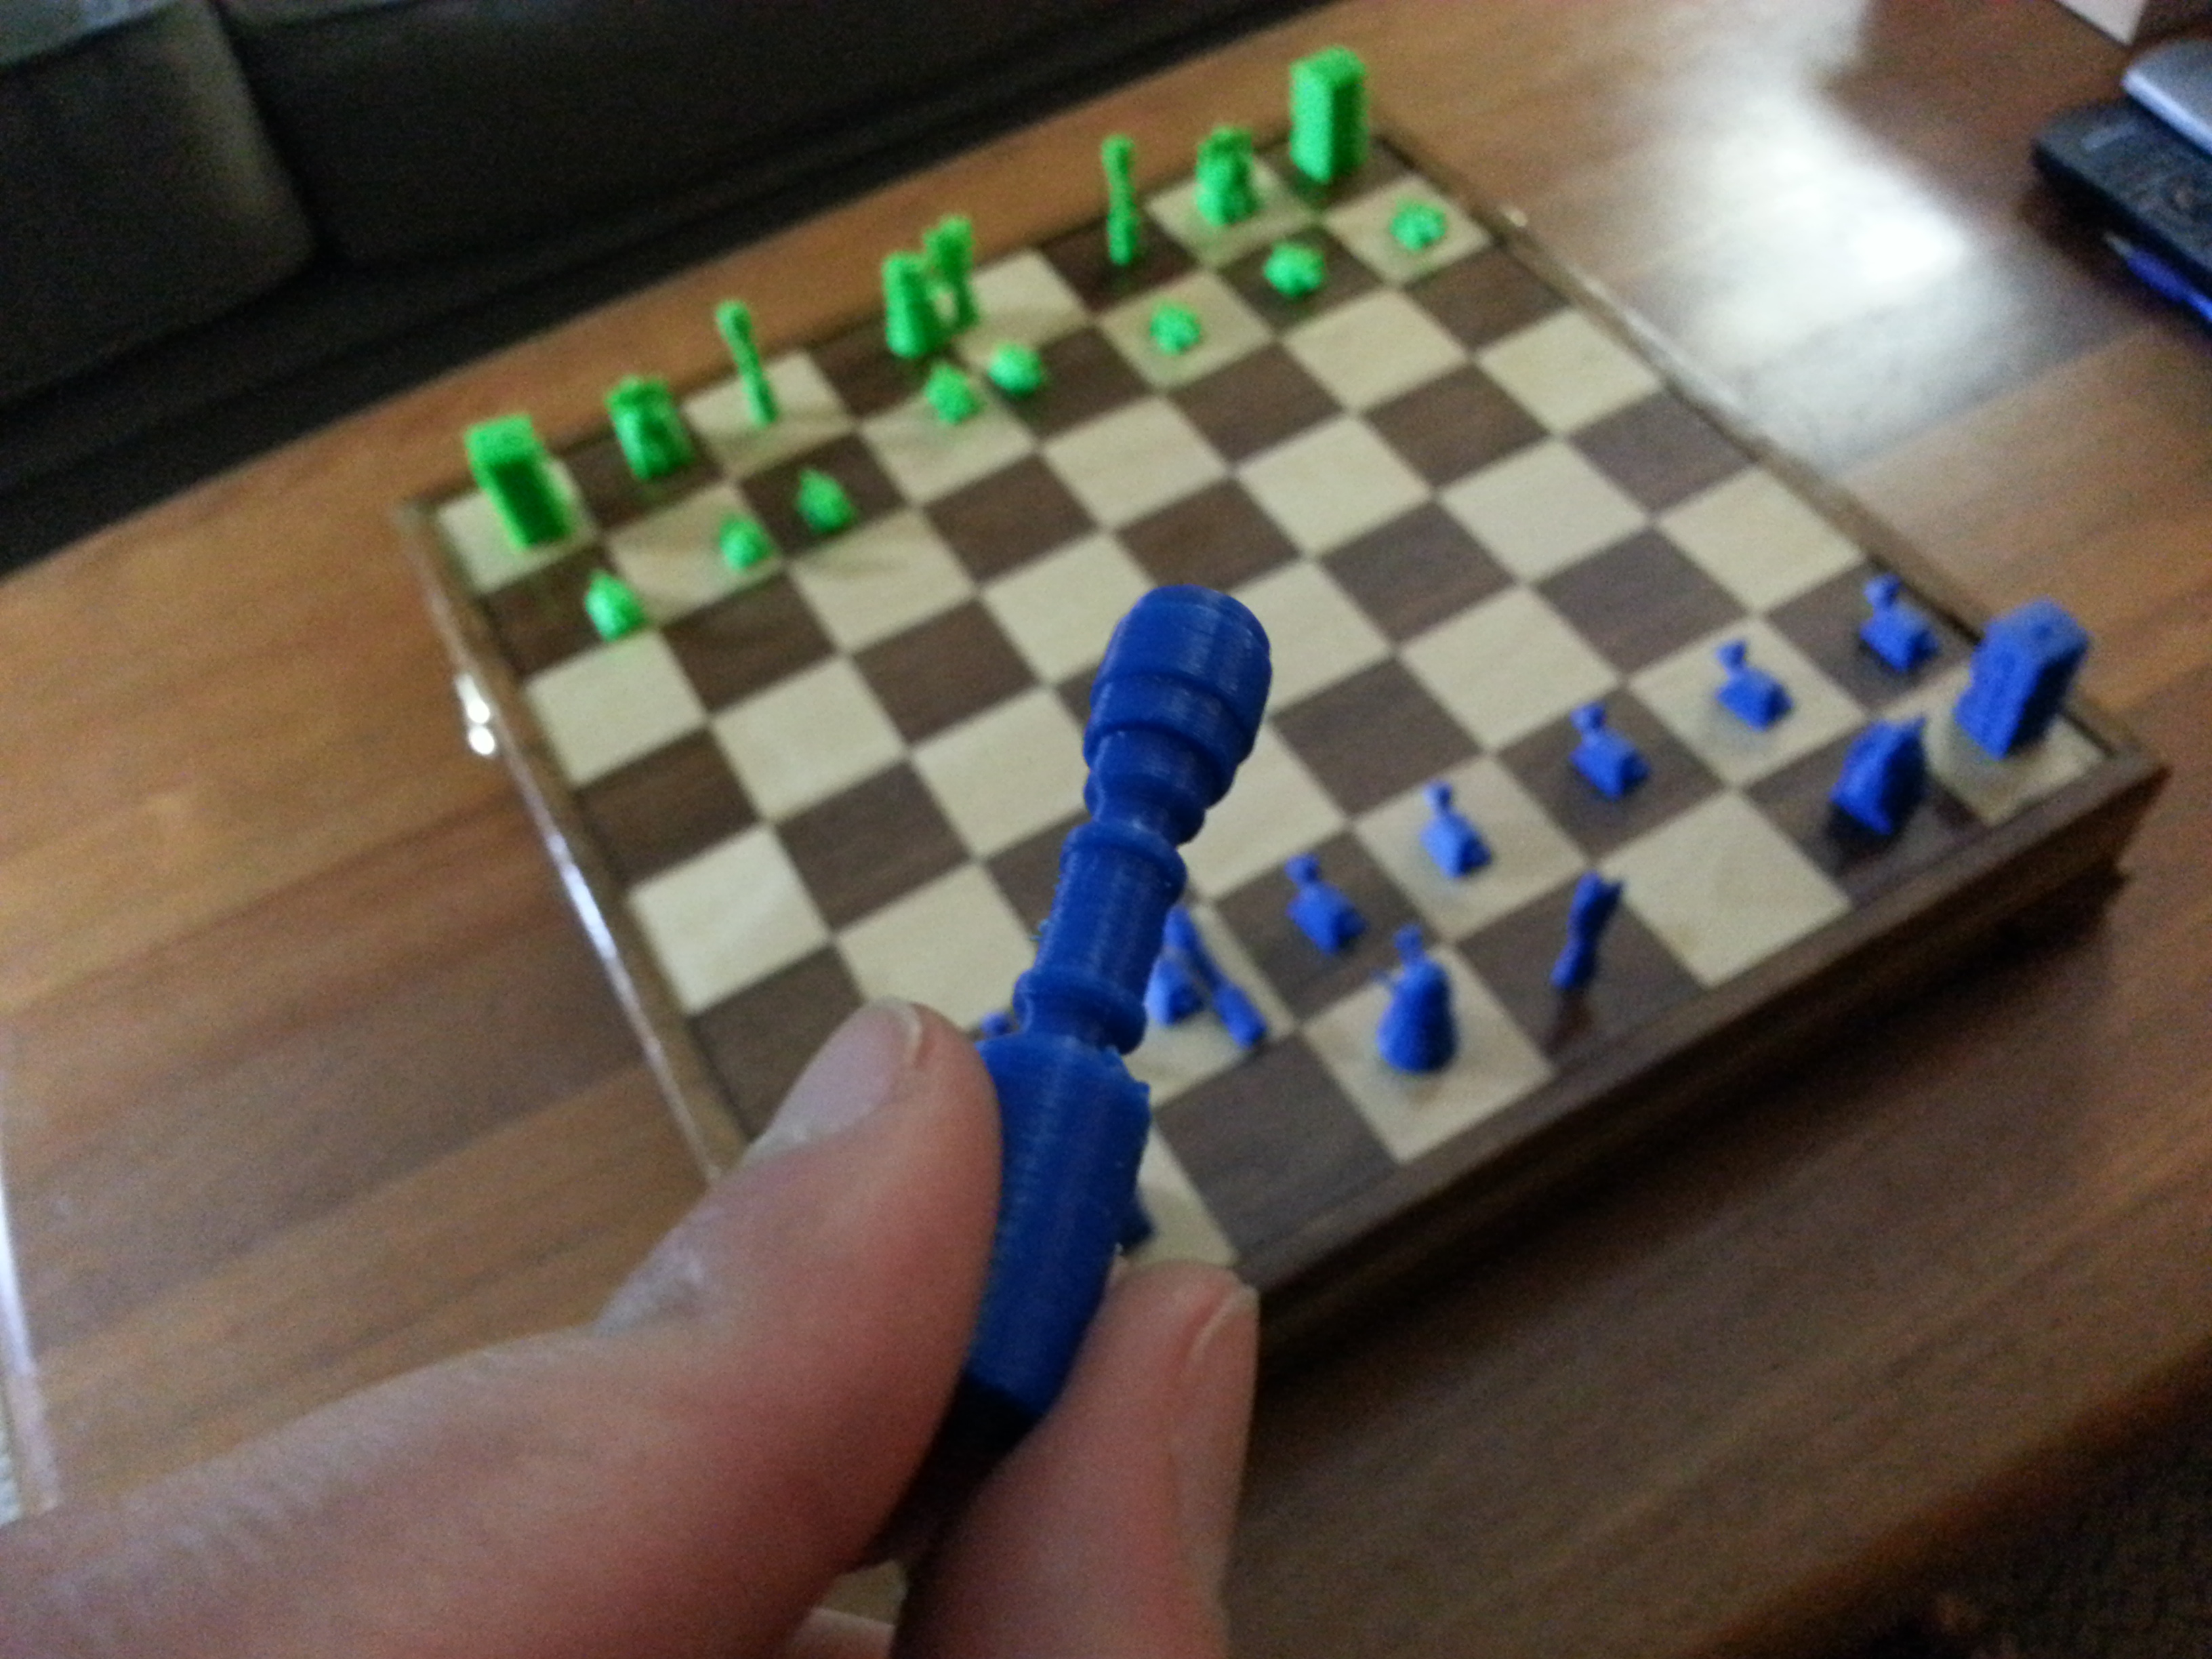 trying to use a sonic screwdriver on wooden chessboard doesn't work